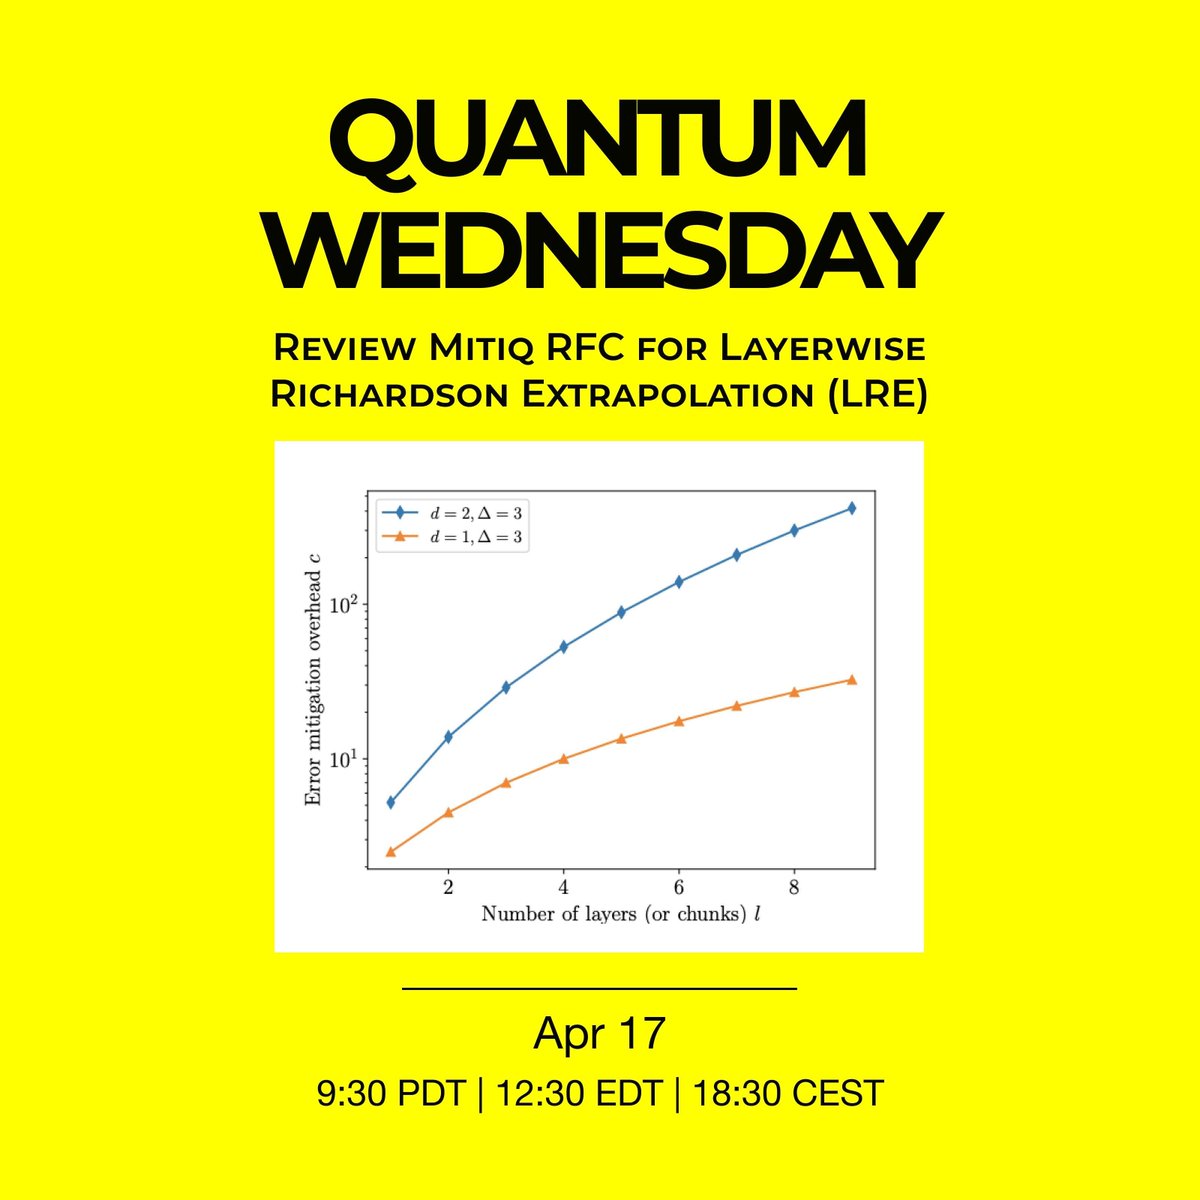 ⚛️ Come join the Unitary Fund for Quantum Wednesday on April 17 at 9:30 am PDT! This week we hear from Purva Thakre about Reviewing Mitiq RFC for Layerwise Richardson Extrapolation (LRE). 📄 Paper: buff.ly/49GhjNk 🔗 Discord: buff.ly/3R0YsHf